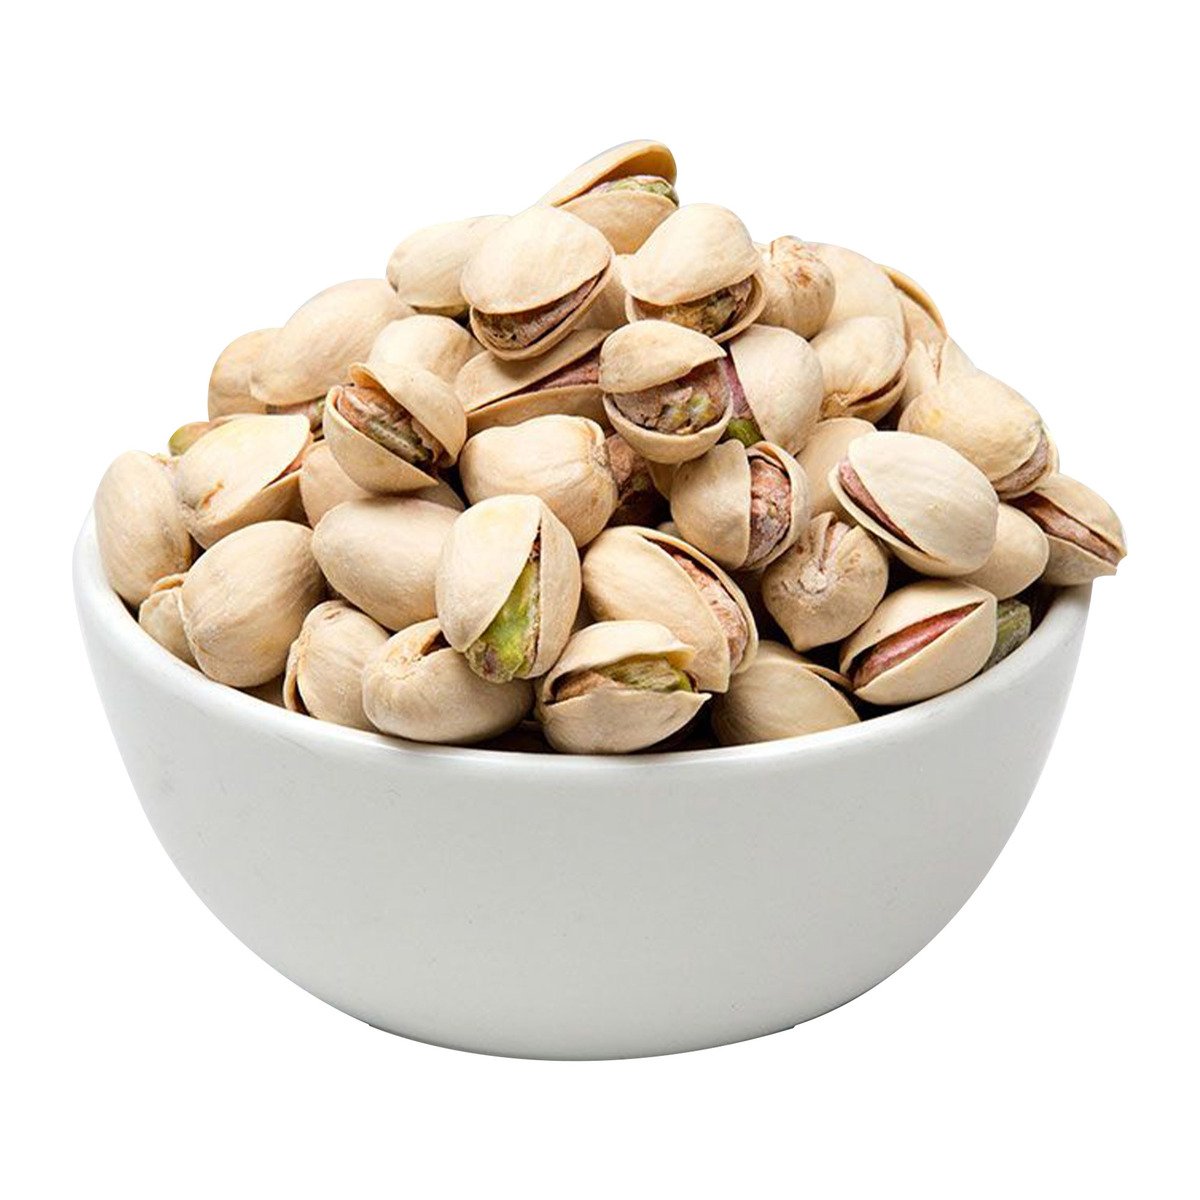 USA Salted Roasted Pistachio 500g